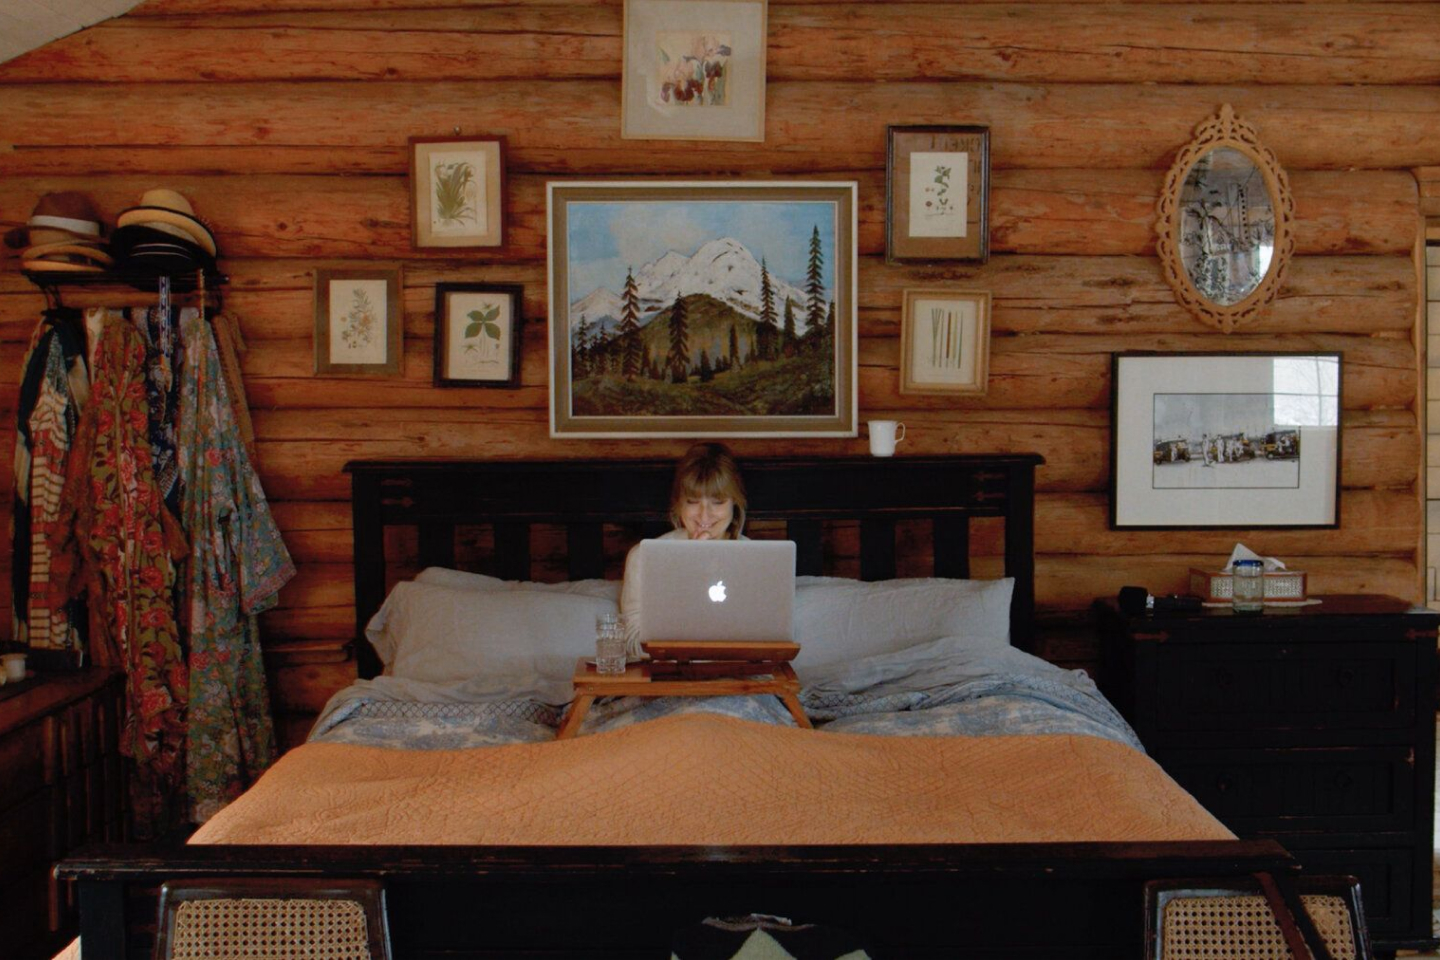 A person working on a MacBook while in bed in a wood paneled room.